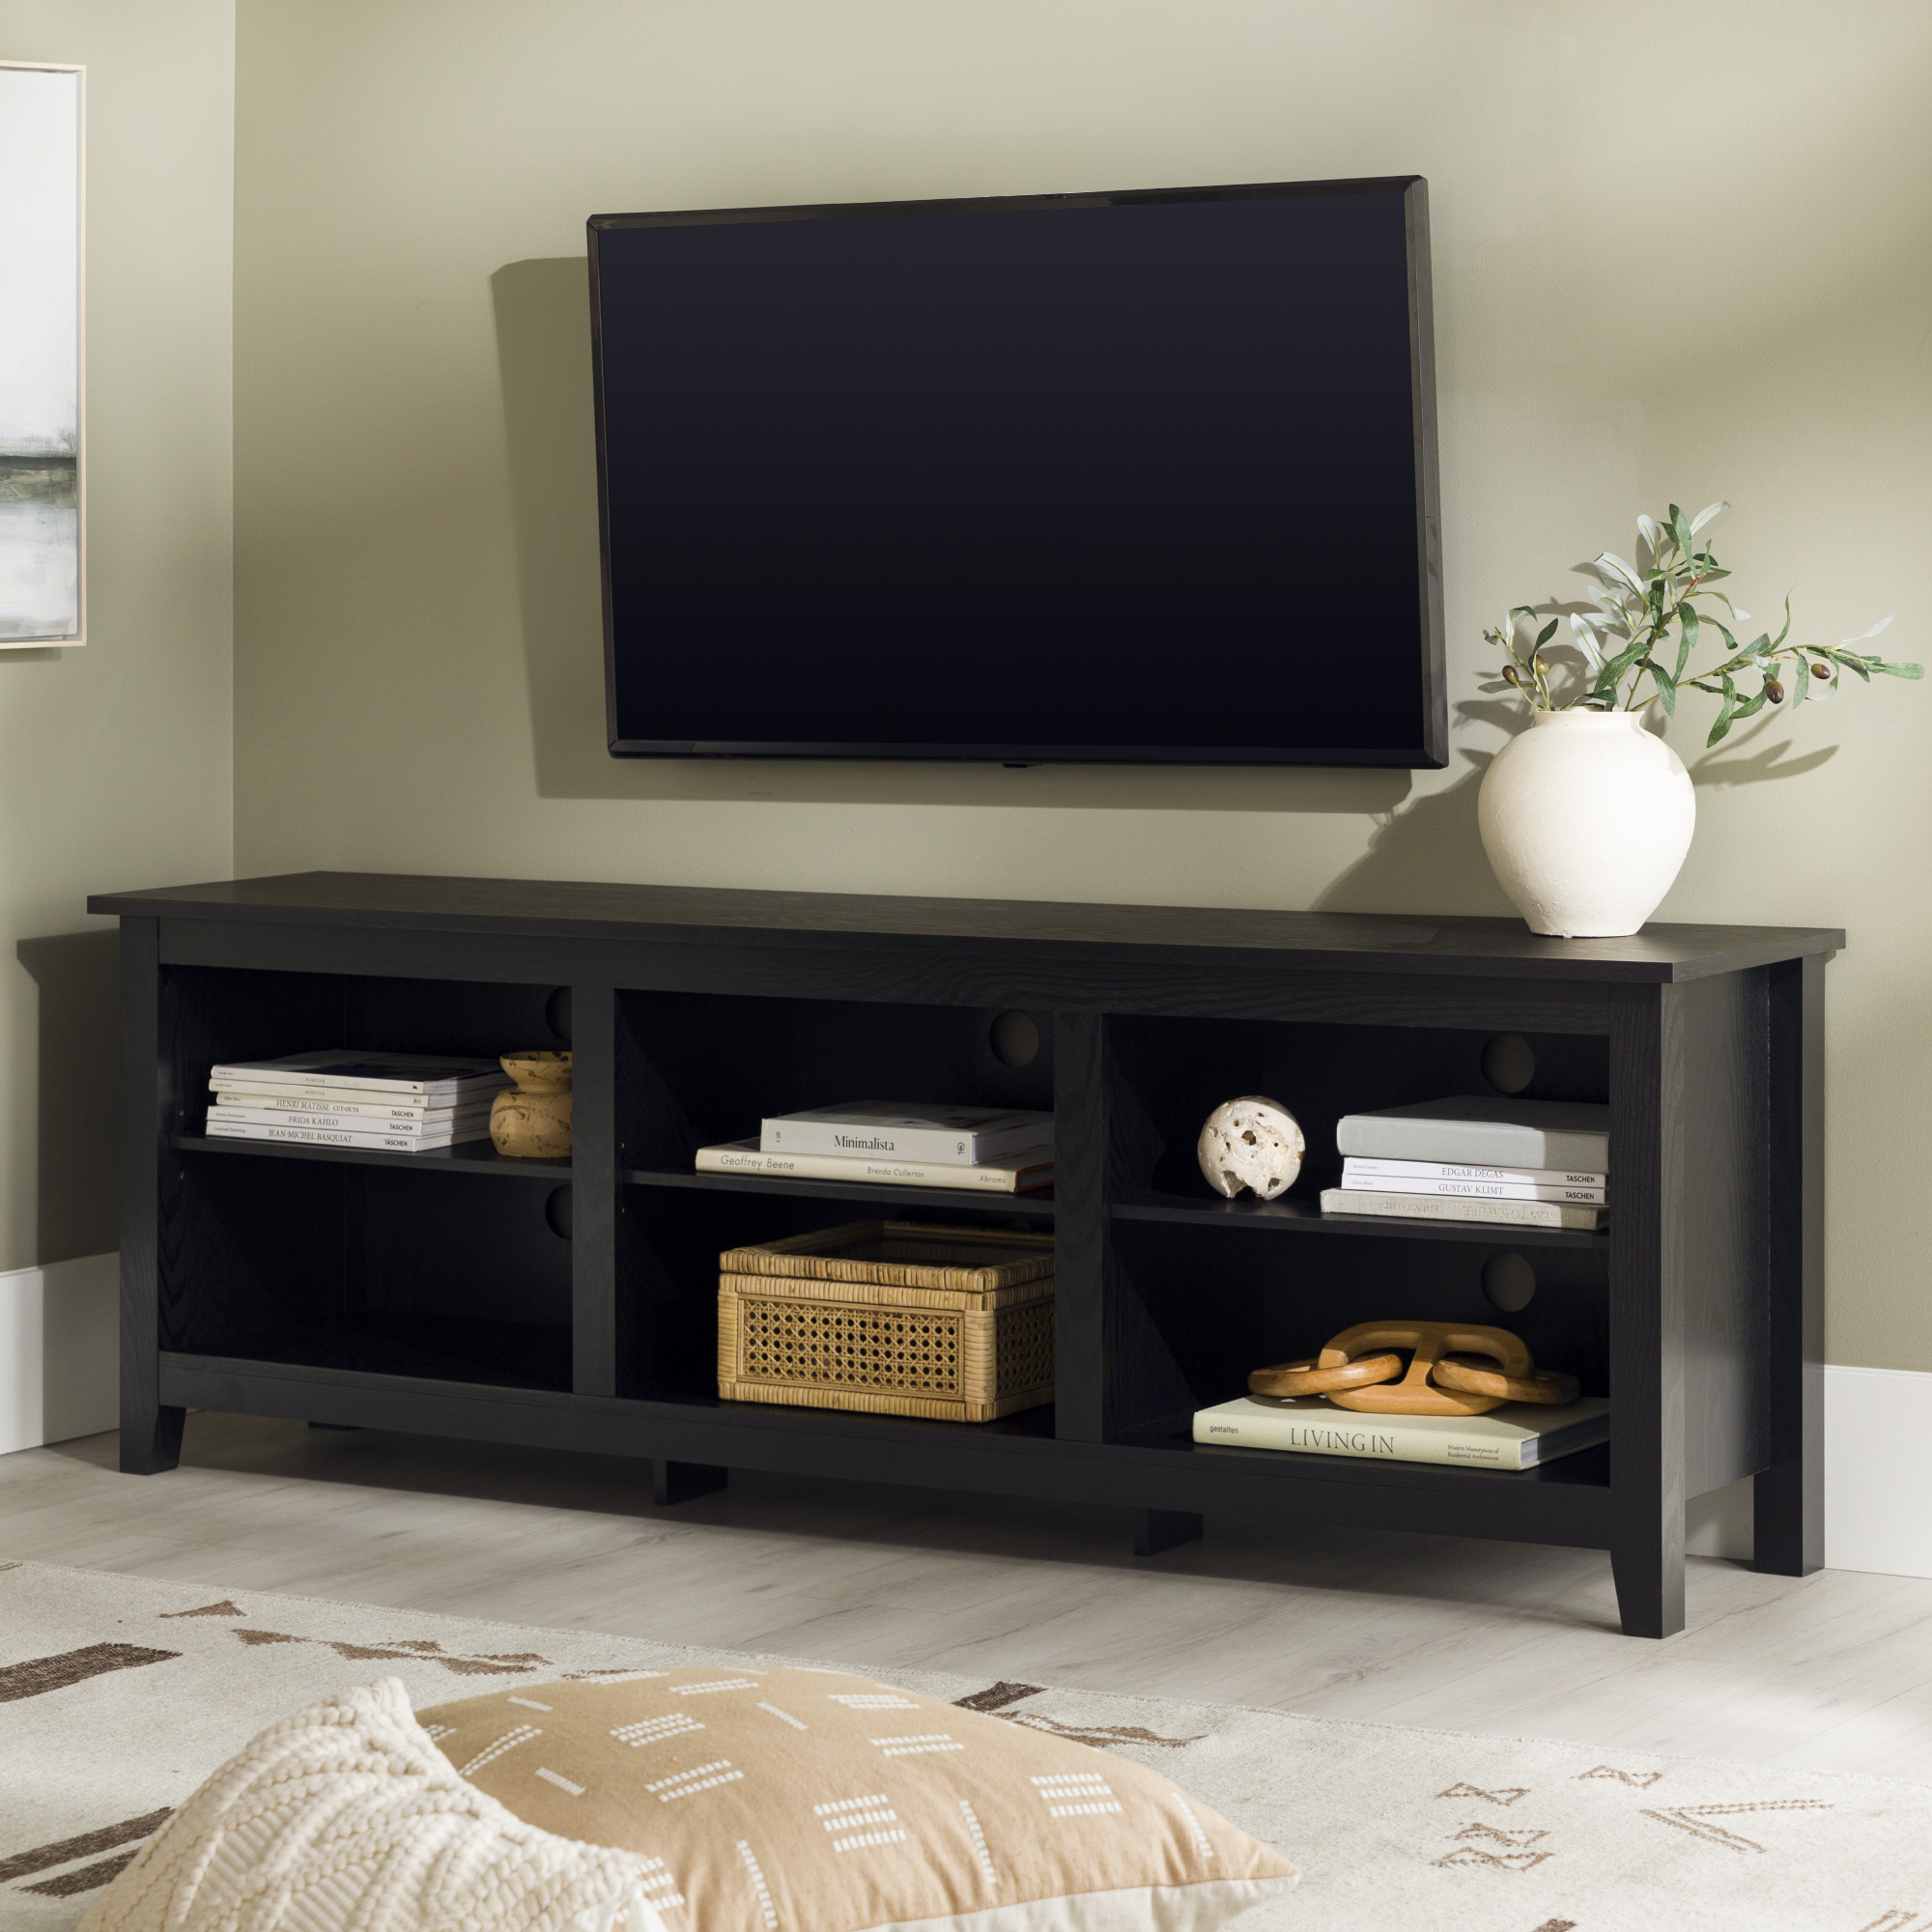 Woven Paths Open Storage TV Stand for TVs up to 80", Black - image 3 of 14